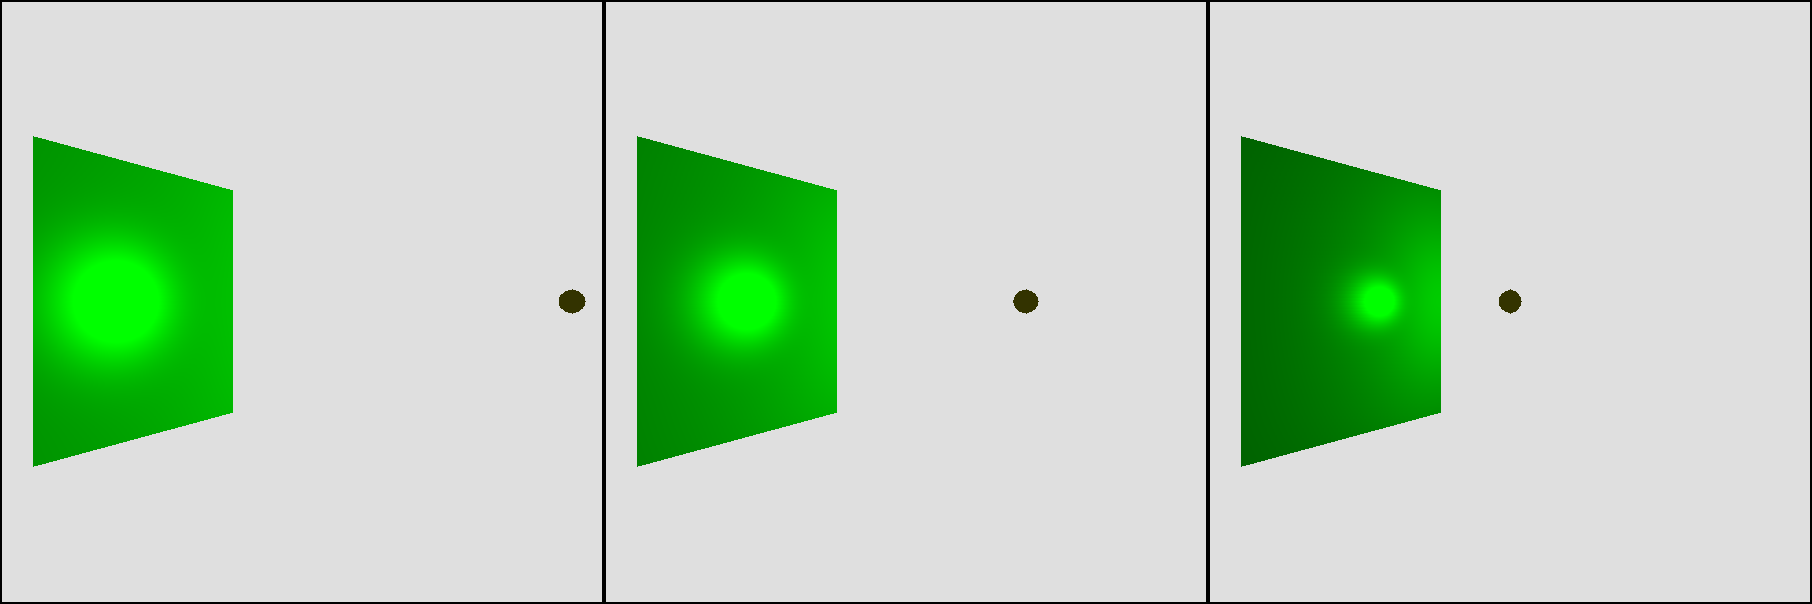 Figure 13-10: The closer the light is to the surface, the brighter and better defined the specular highlight looks.